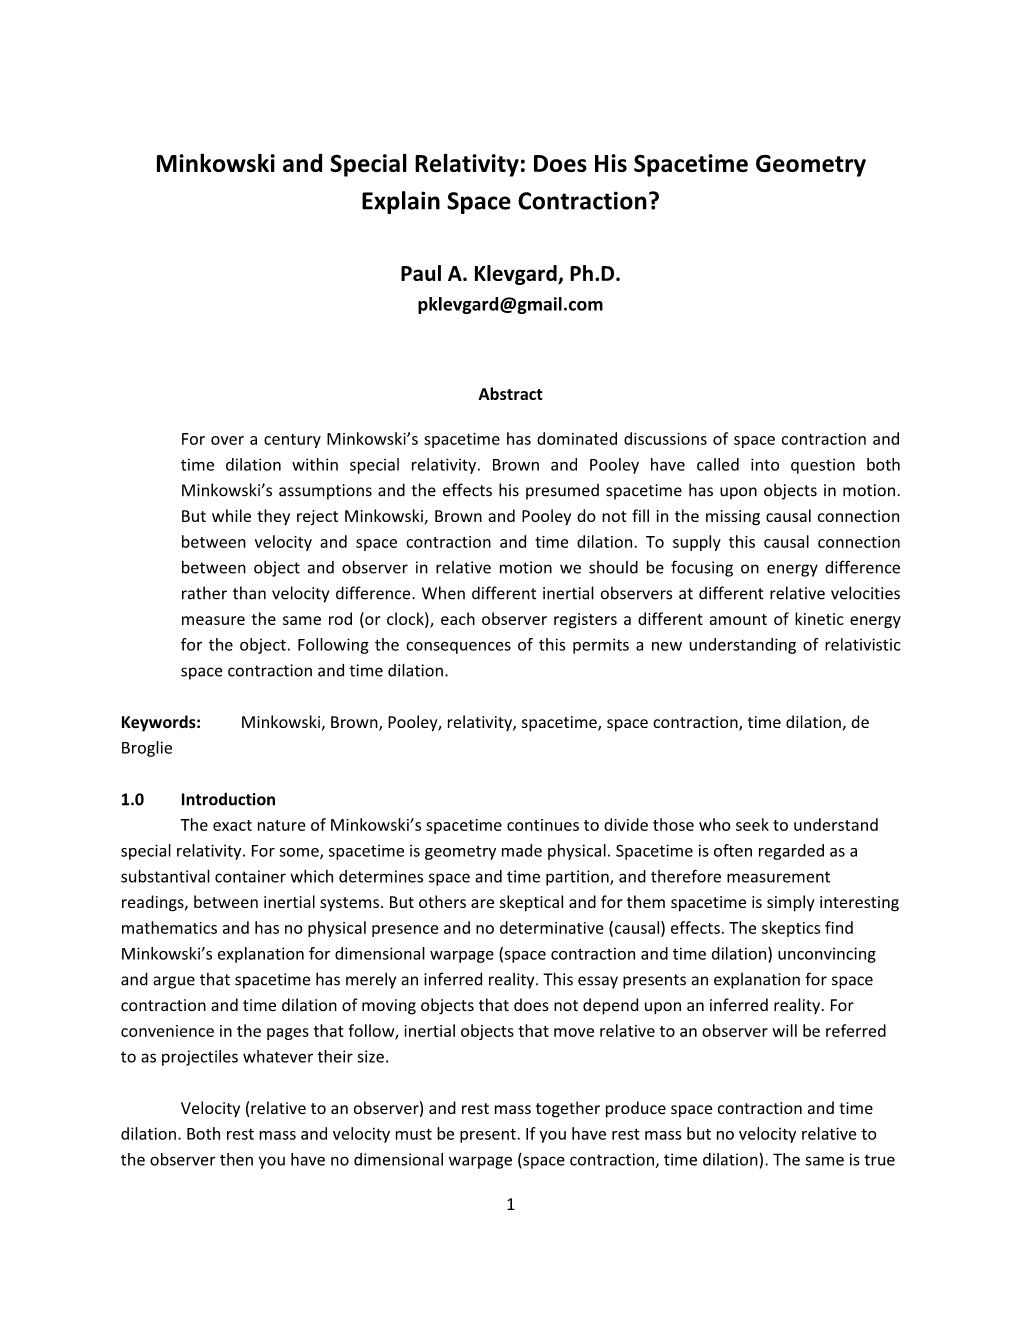 Minkowski and Special Relativity: Does His Spacetime Geometry Explain Space Contraction?